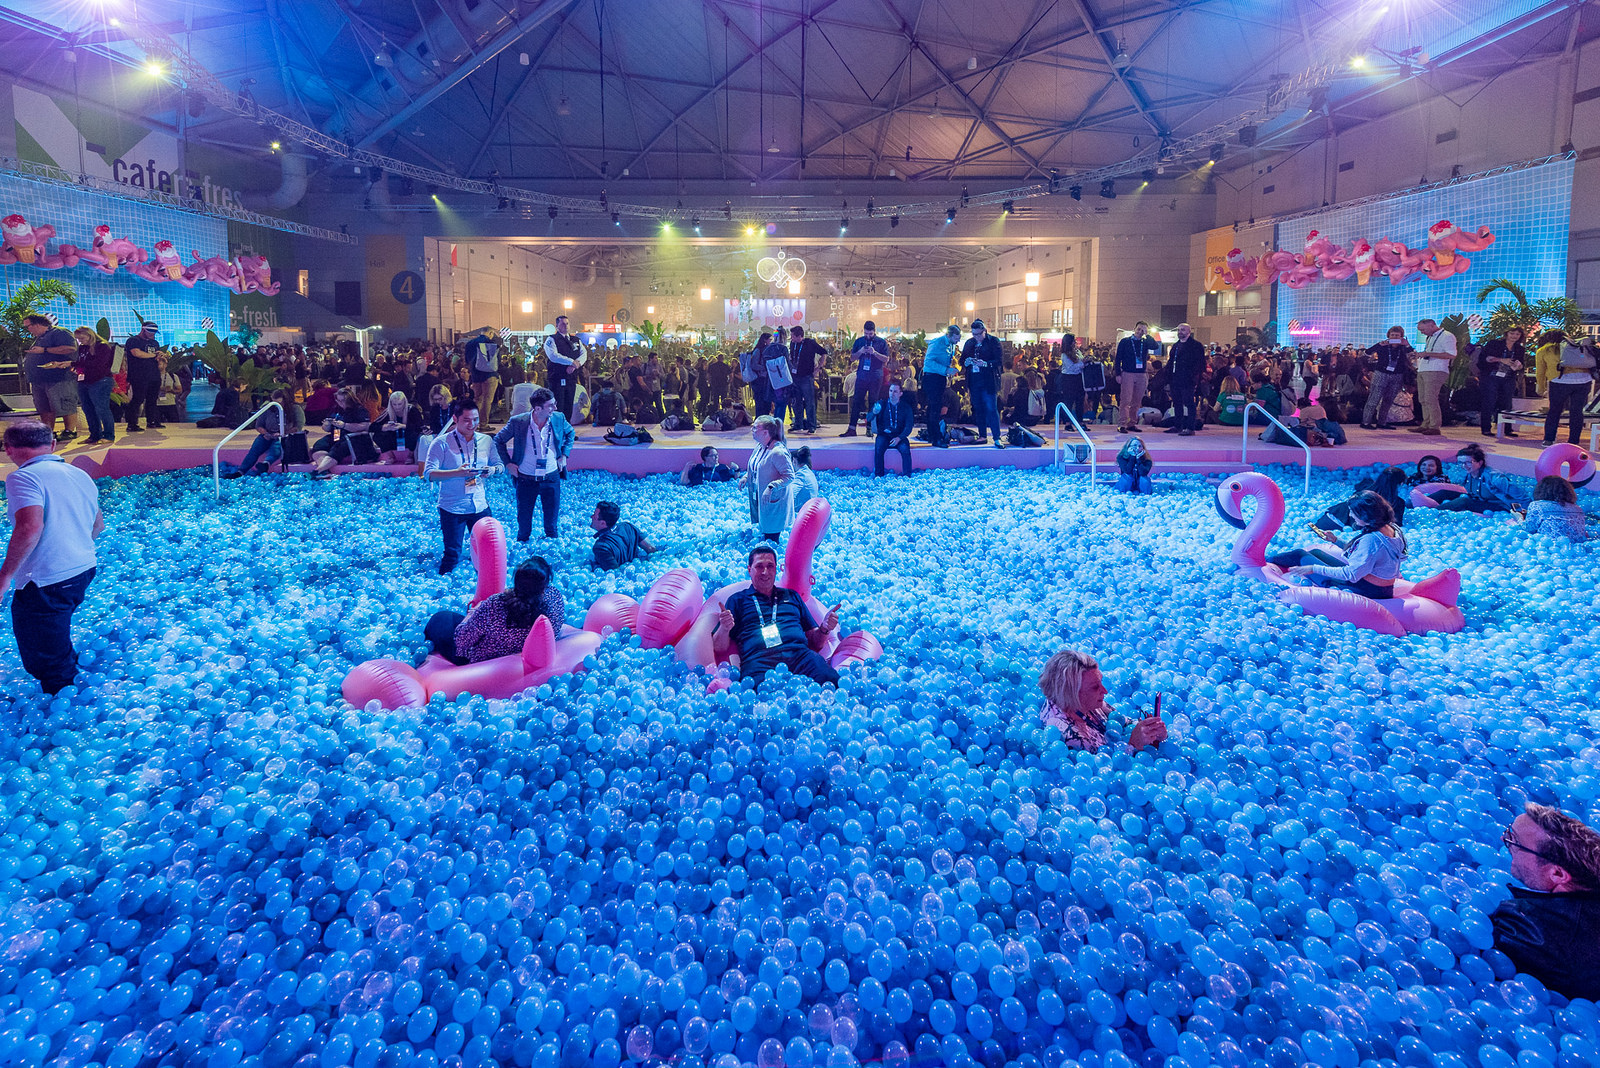 Xerocon Was The Adult Playground We All Have Been Waiting For While Still Being Educational